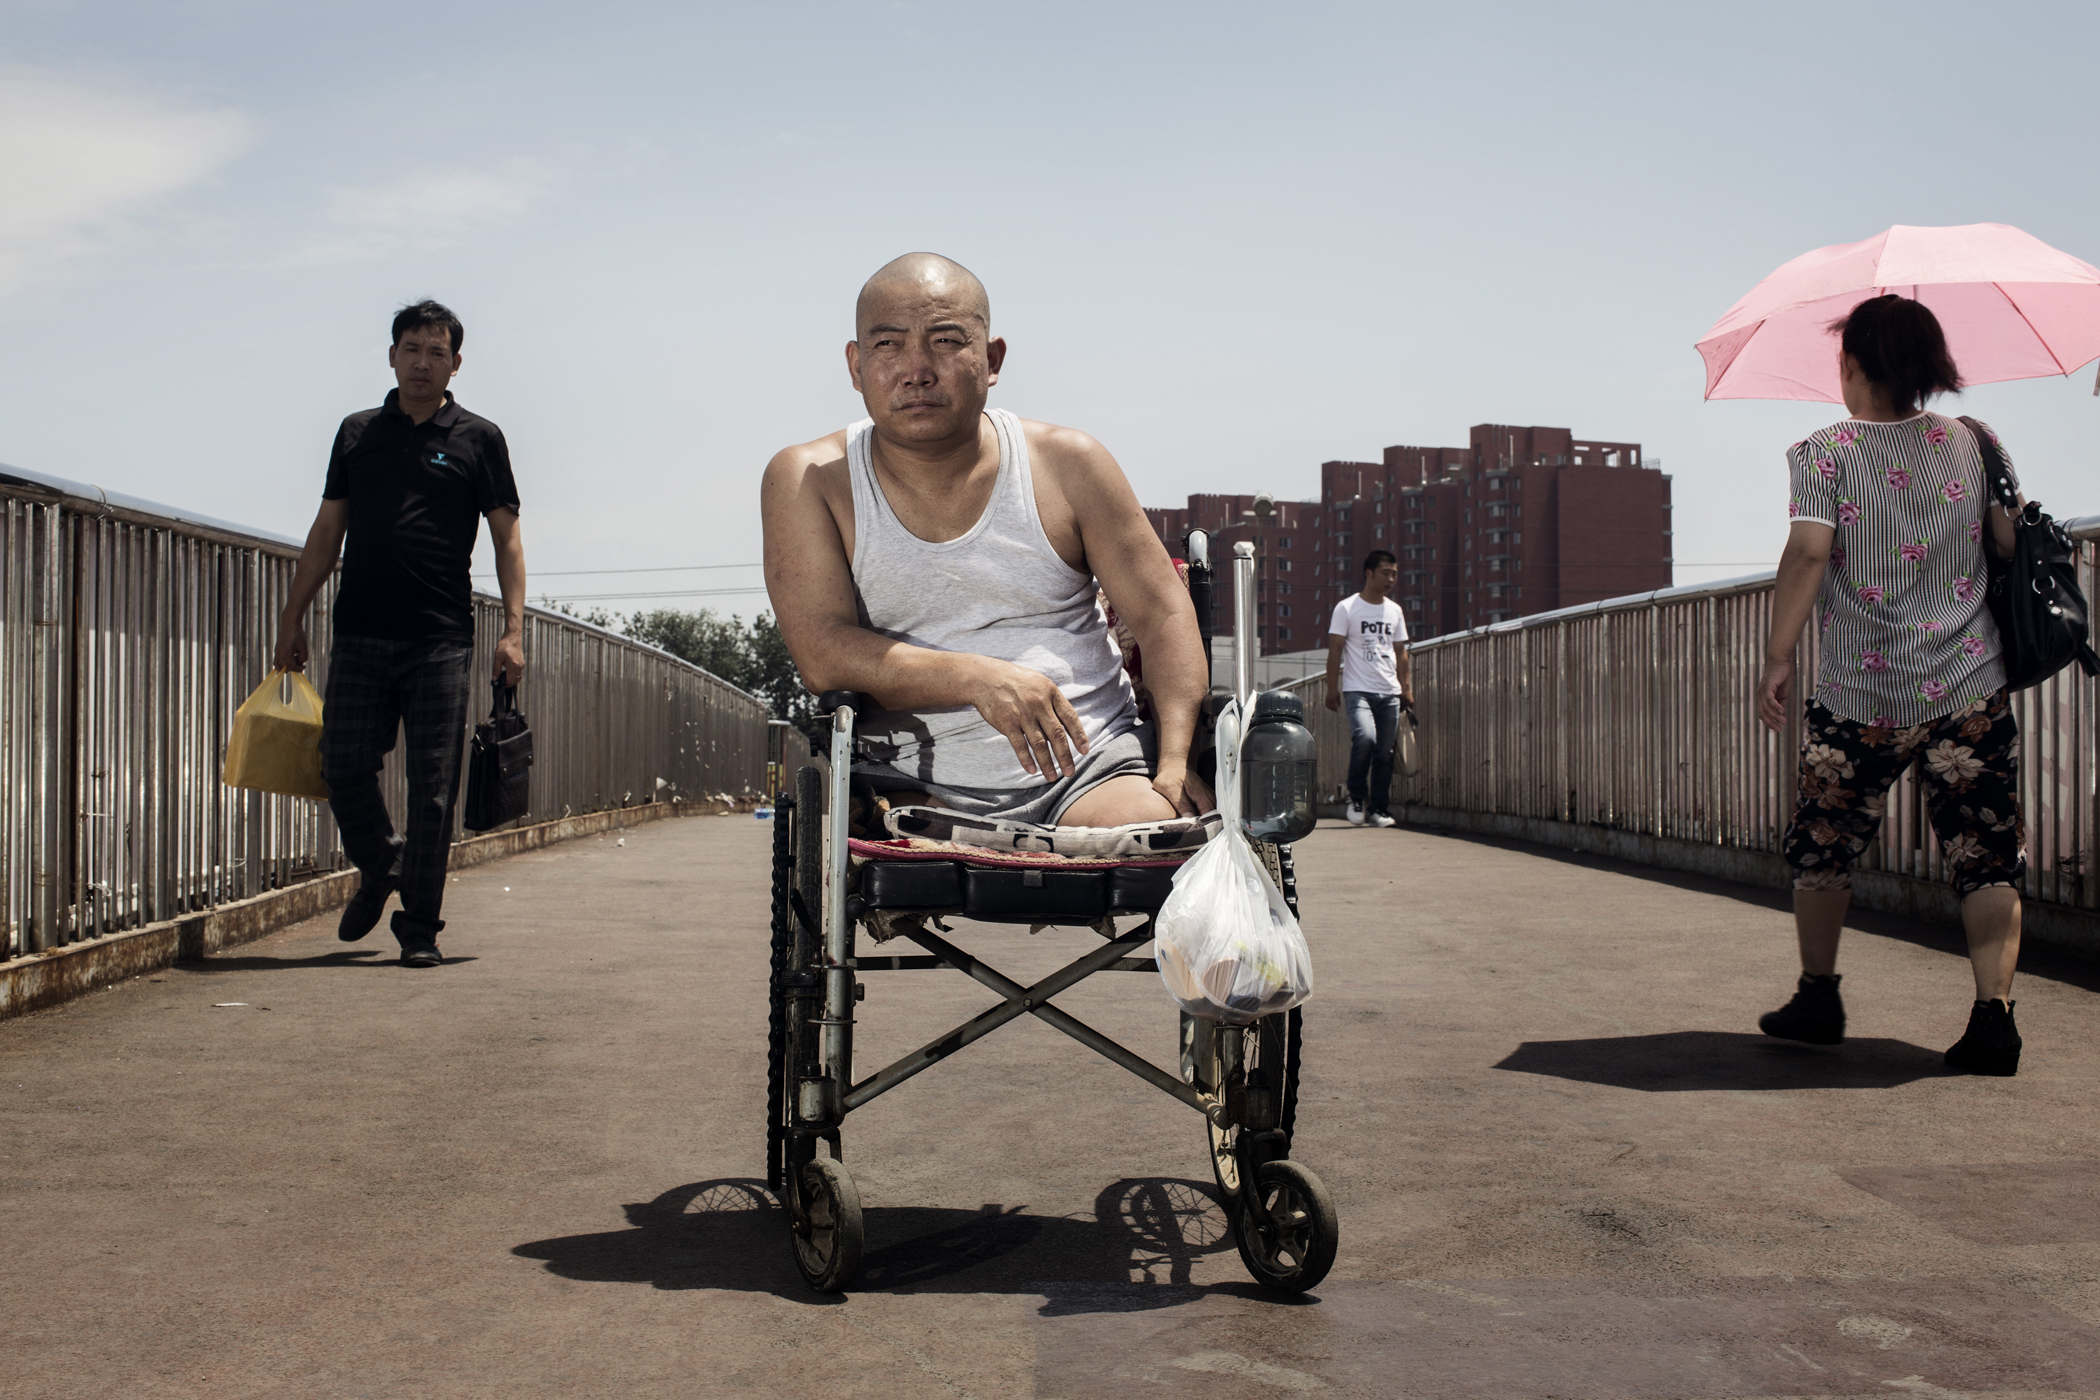 Hebei farmer Zheng currently in Beijing where he is having prothesis made. July 2014.